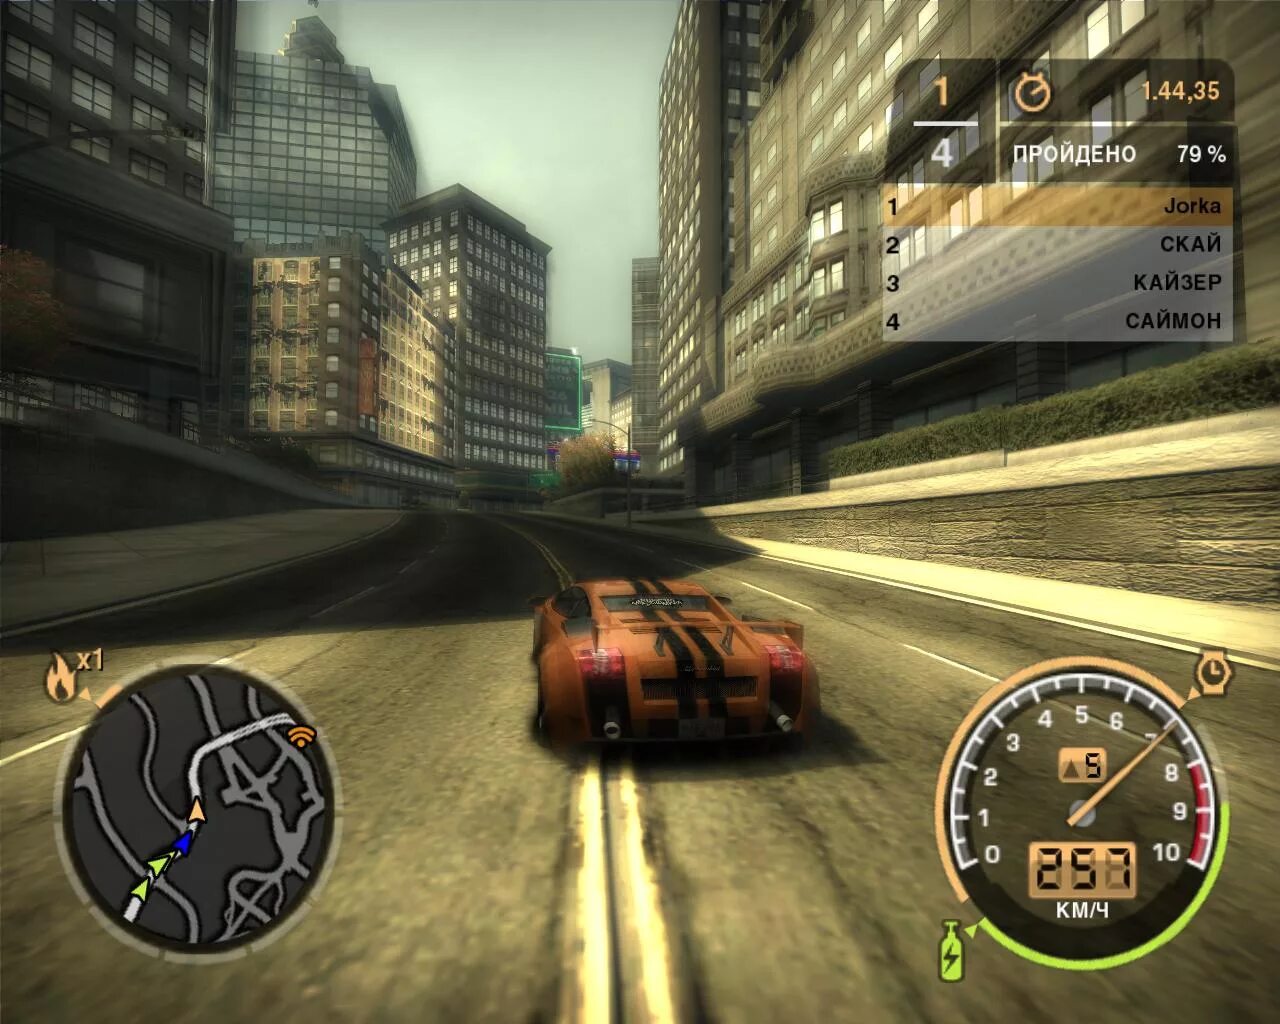 NFS most wanted 2005. NFS most wanted 2005 mobile Android. NFS MW 2005 Android. NFS most wanted 2005 на андроид. Кэш nfs на андроид